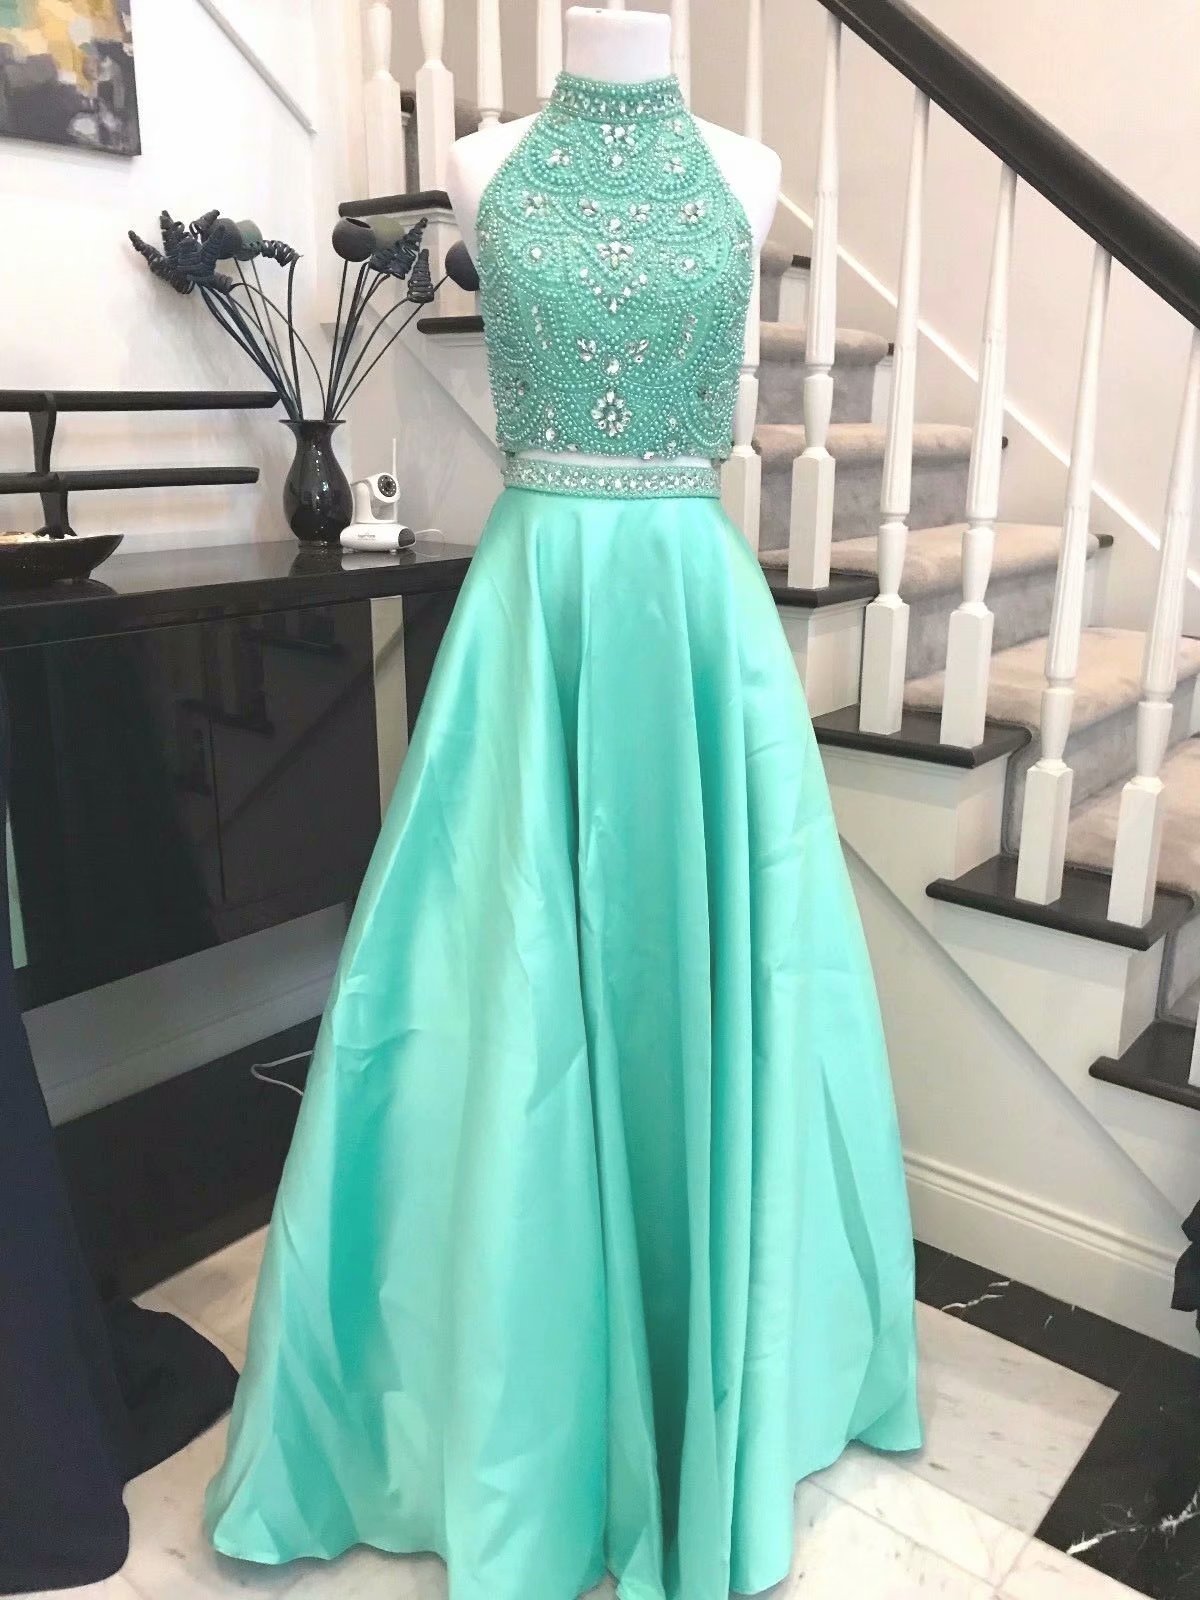 Fashion Two Piece Prom Dresses 2019 Satin Halter Light Green Long Evening Gowns